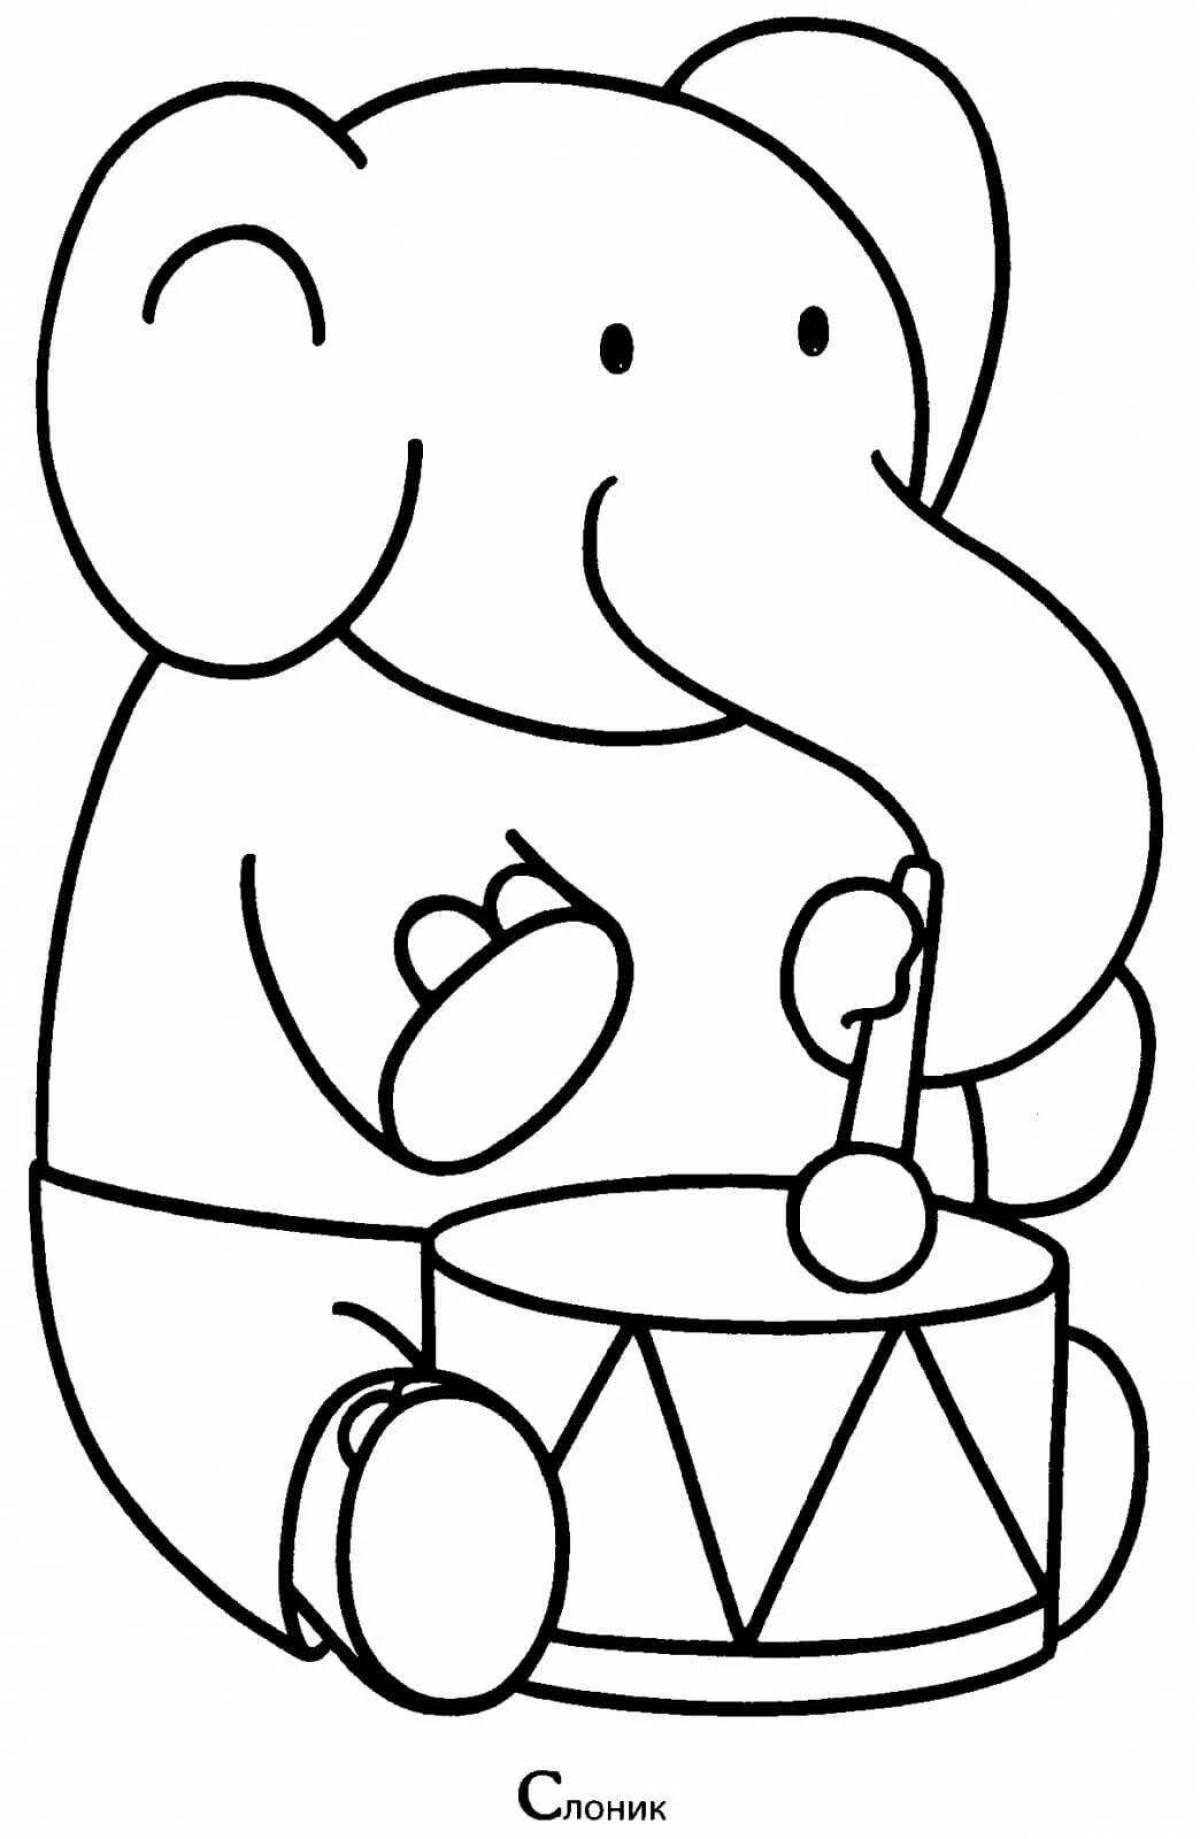 Color-magical coloring page pdf for children 3-4 years old